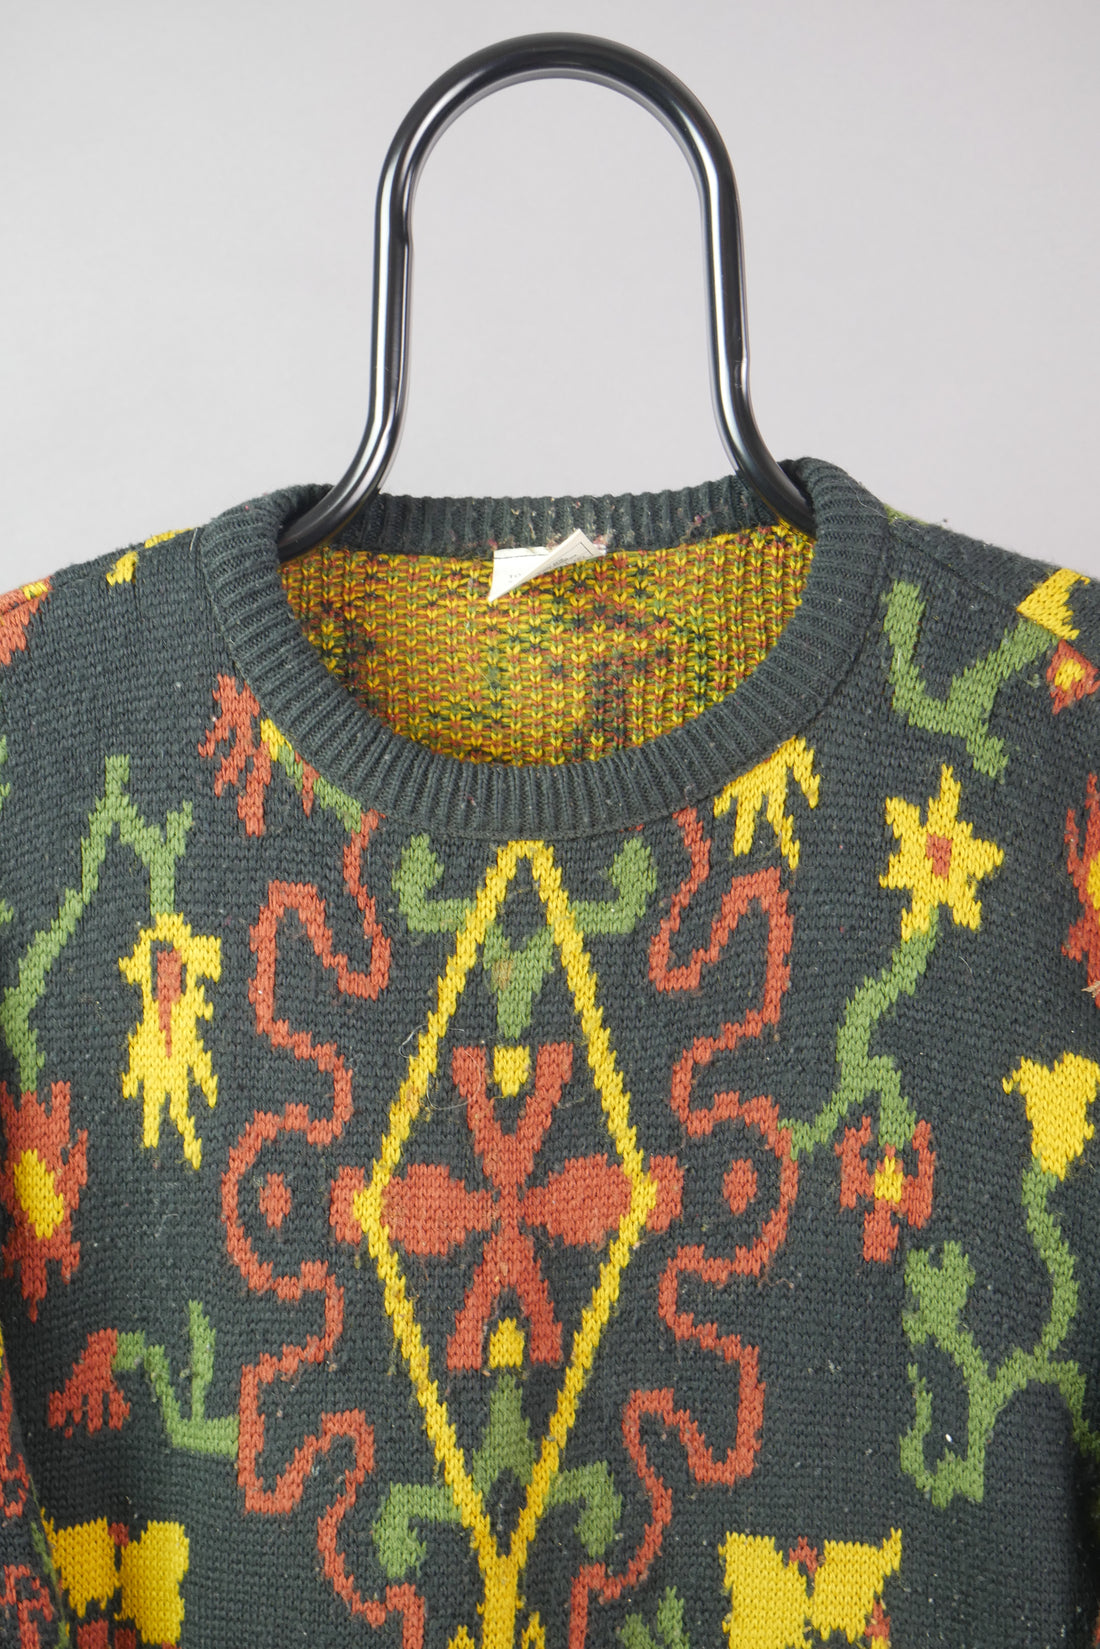 The 70s Floral Sweater (XL)